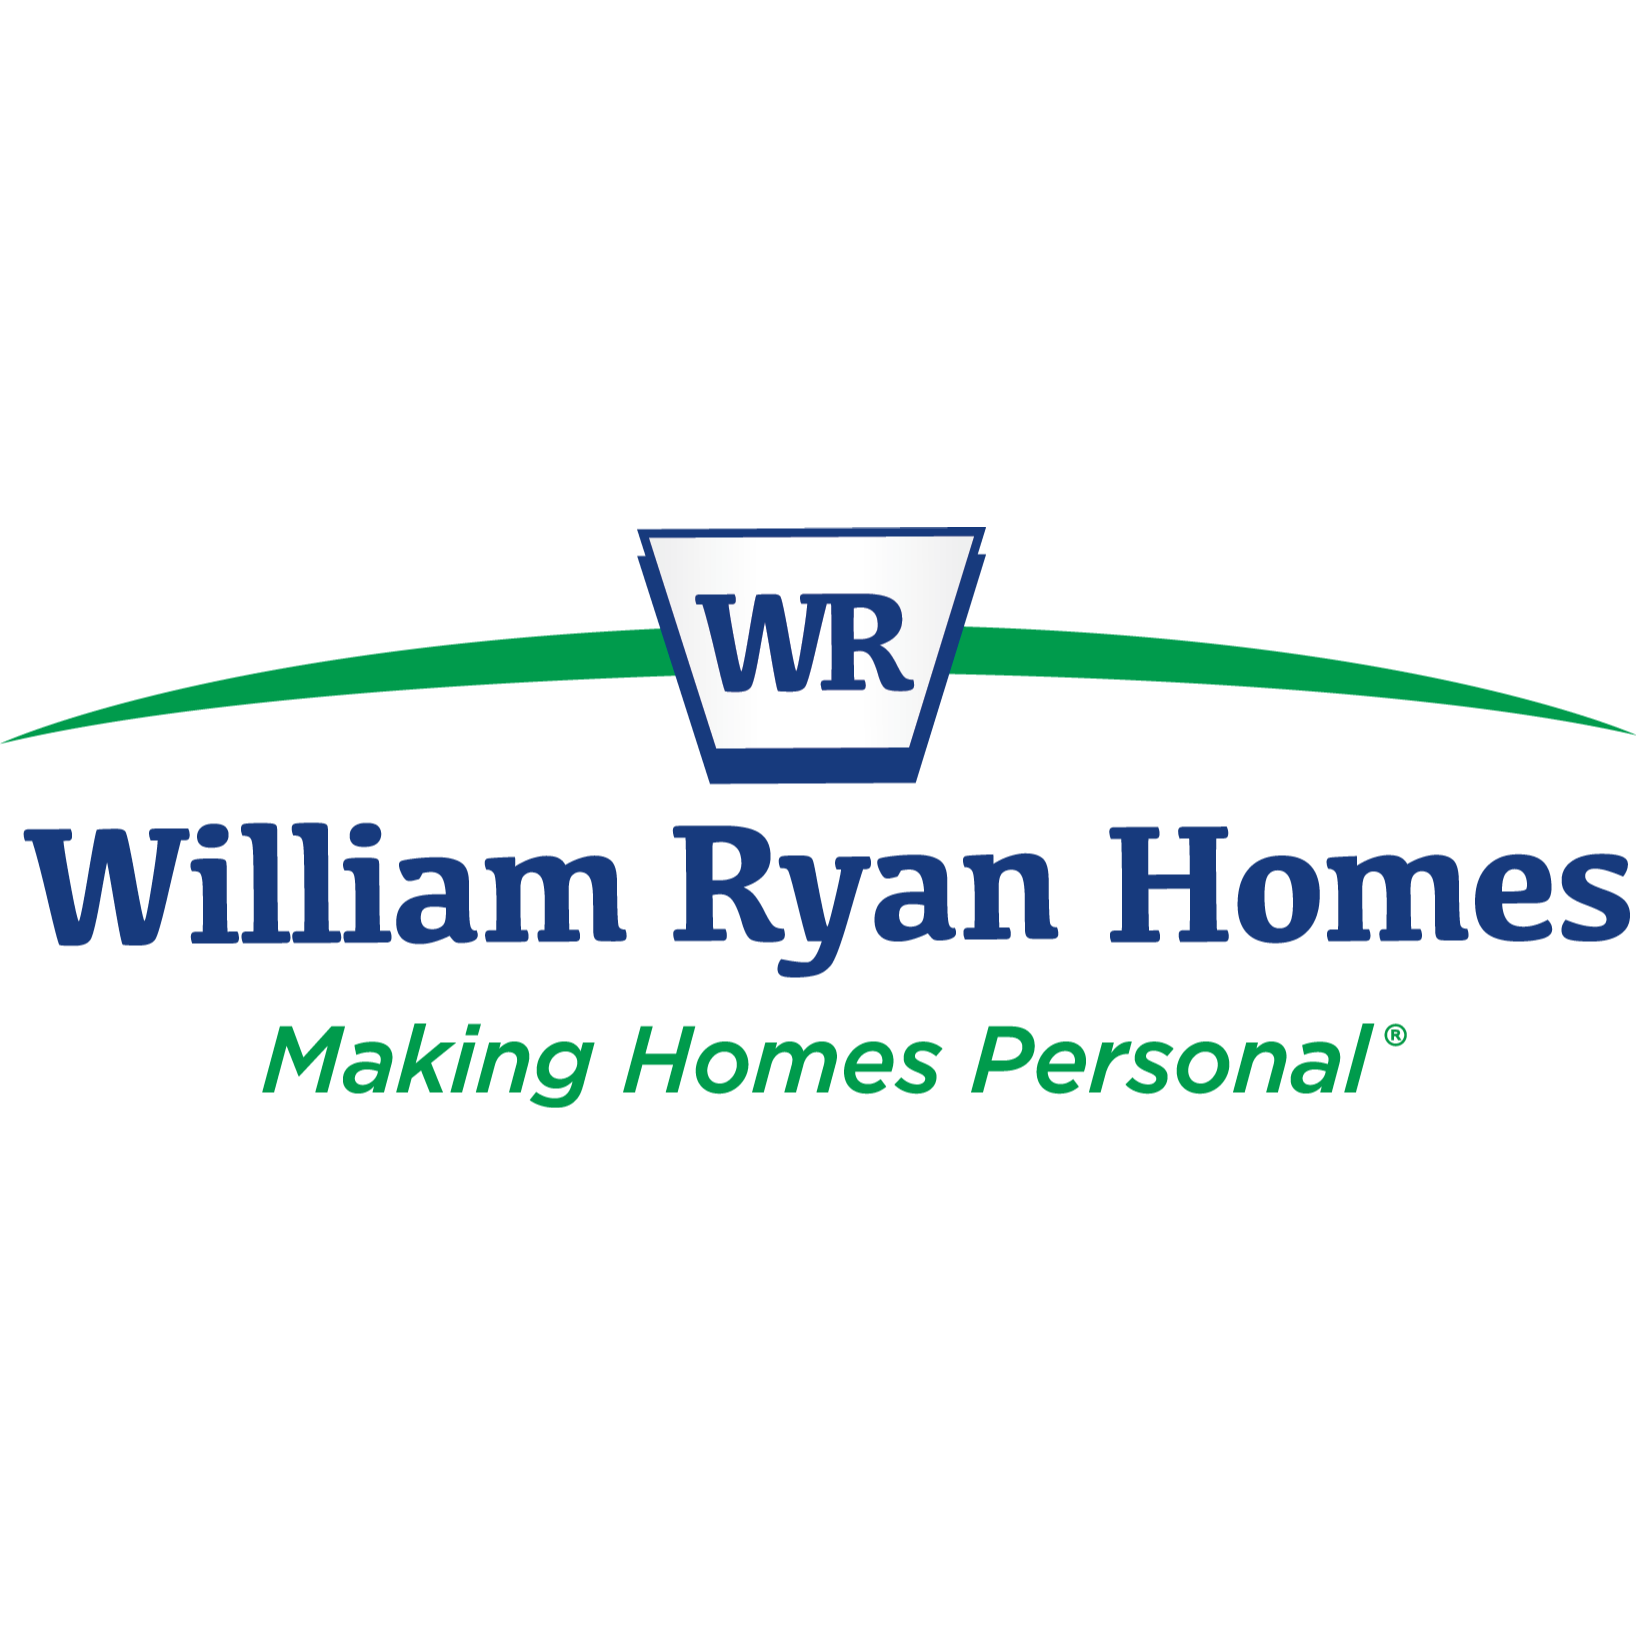 William Ryan Homes at West Crossing